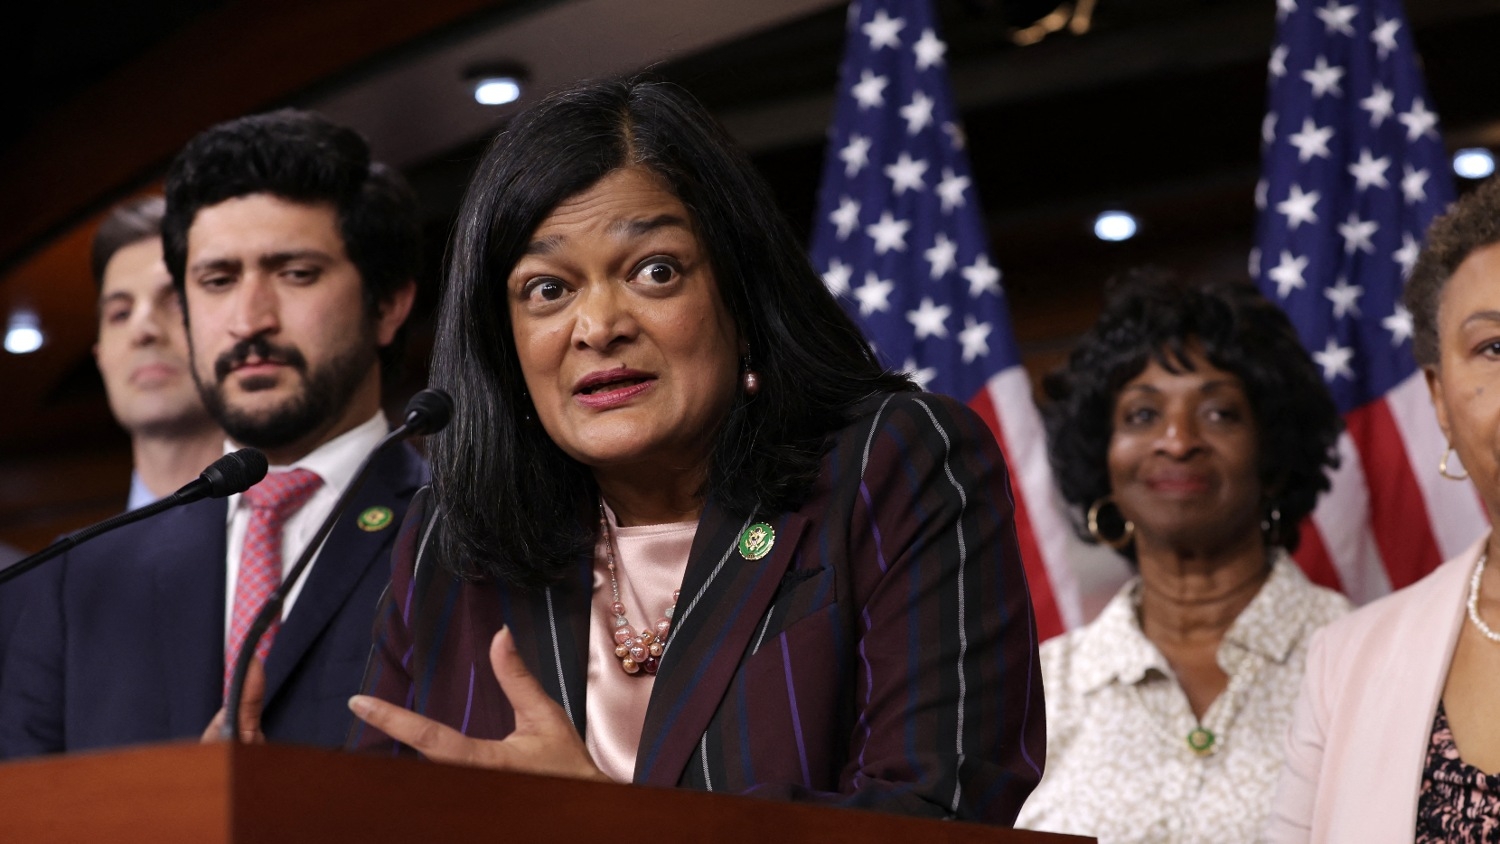 Pramila Jayapal is the head of the House Progressive Caucus which has more than 100 members of Congress.